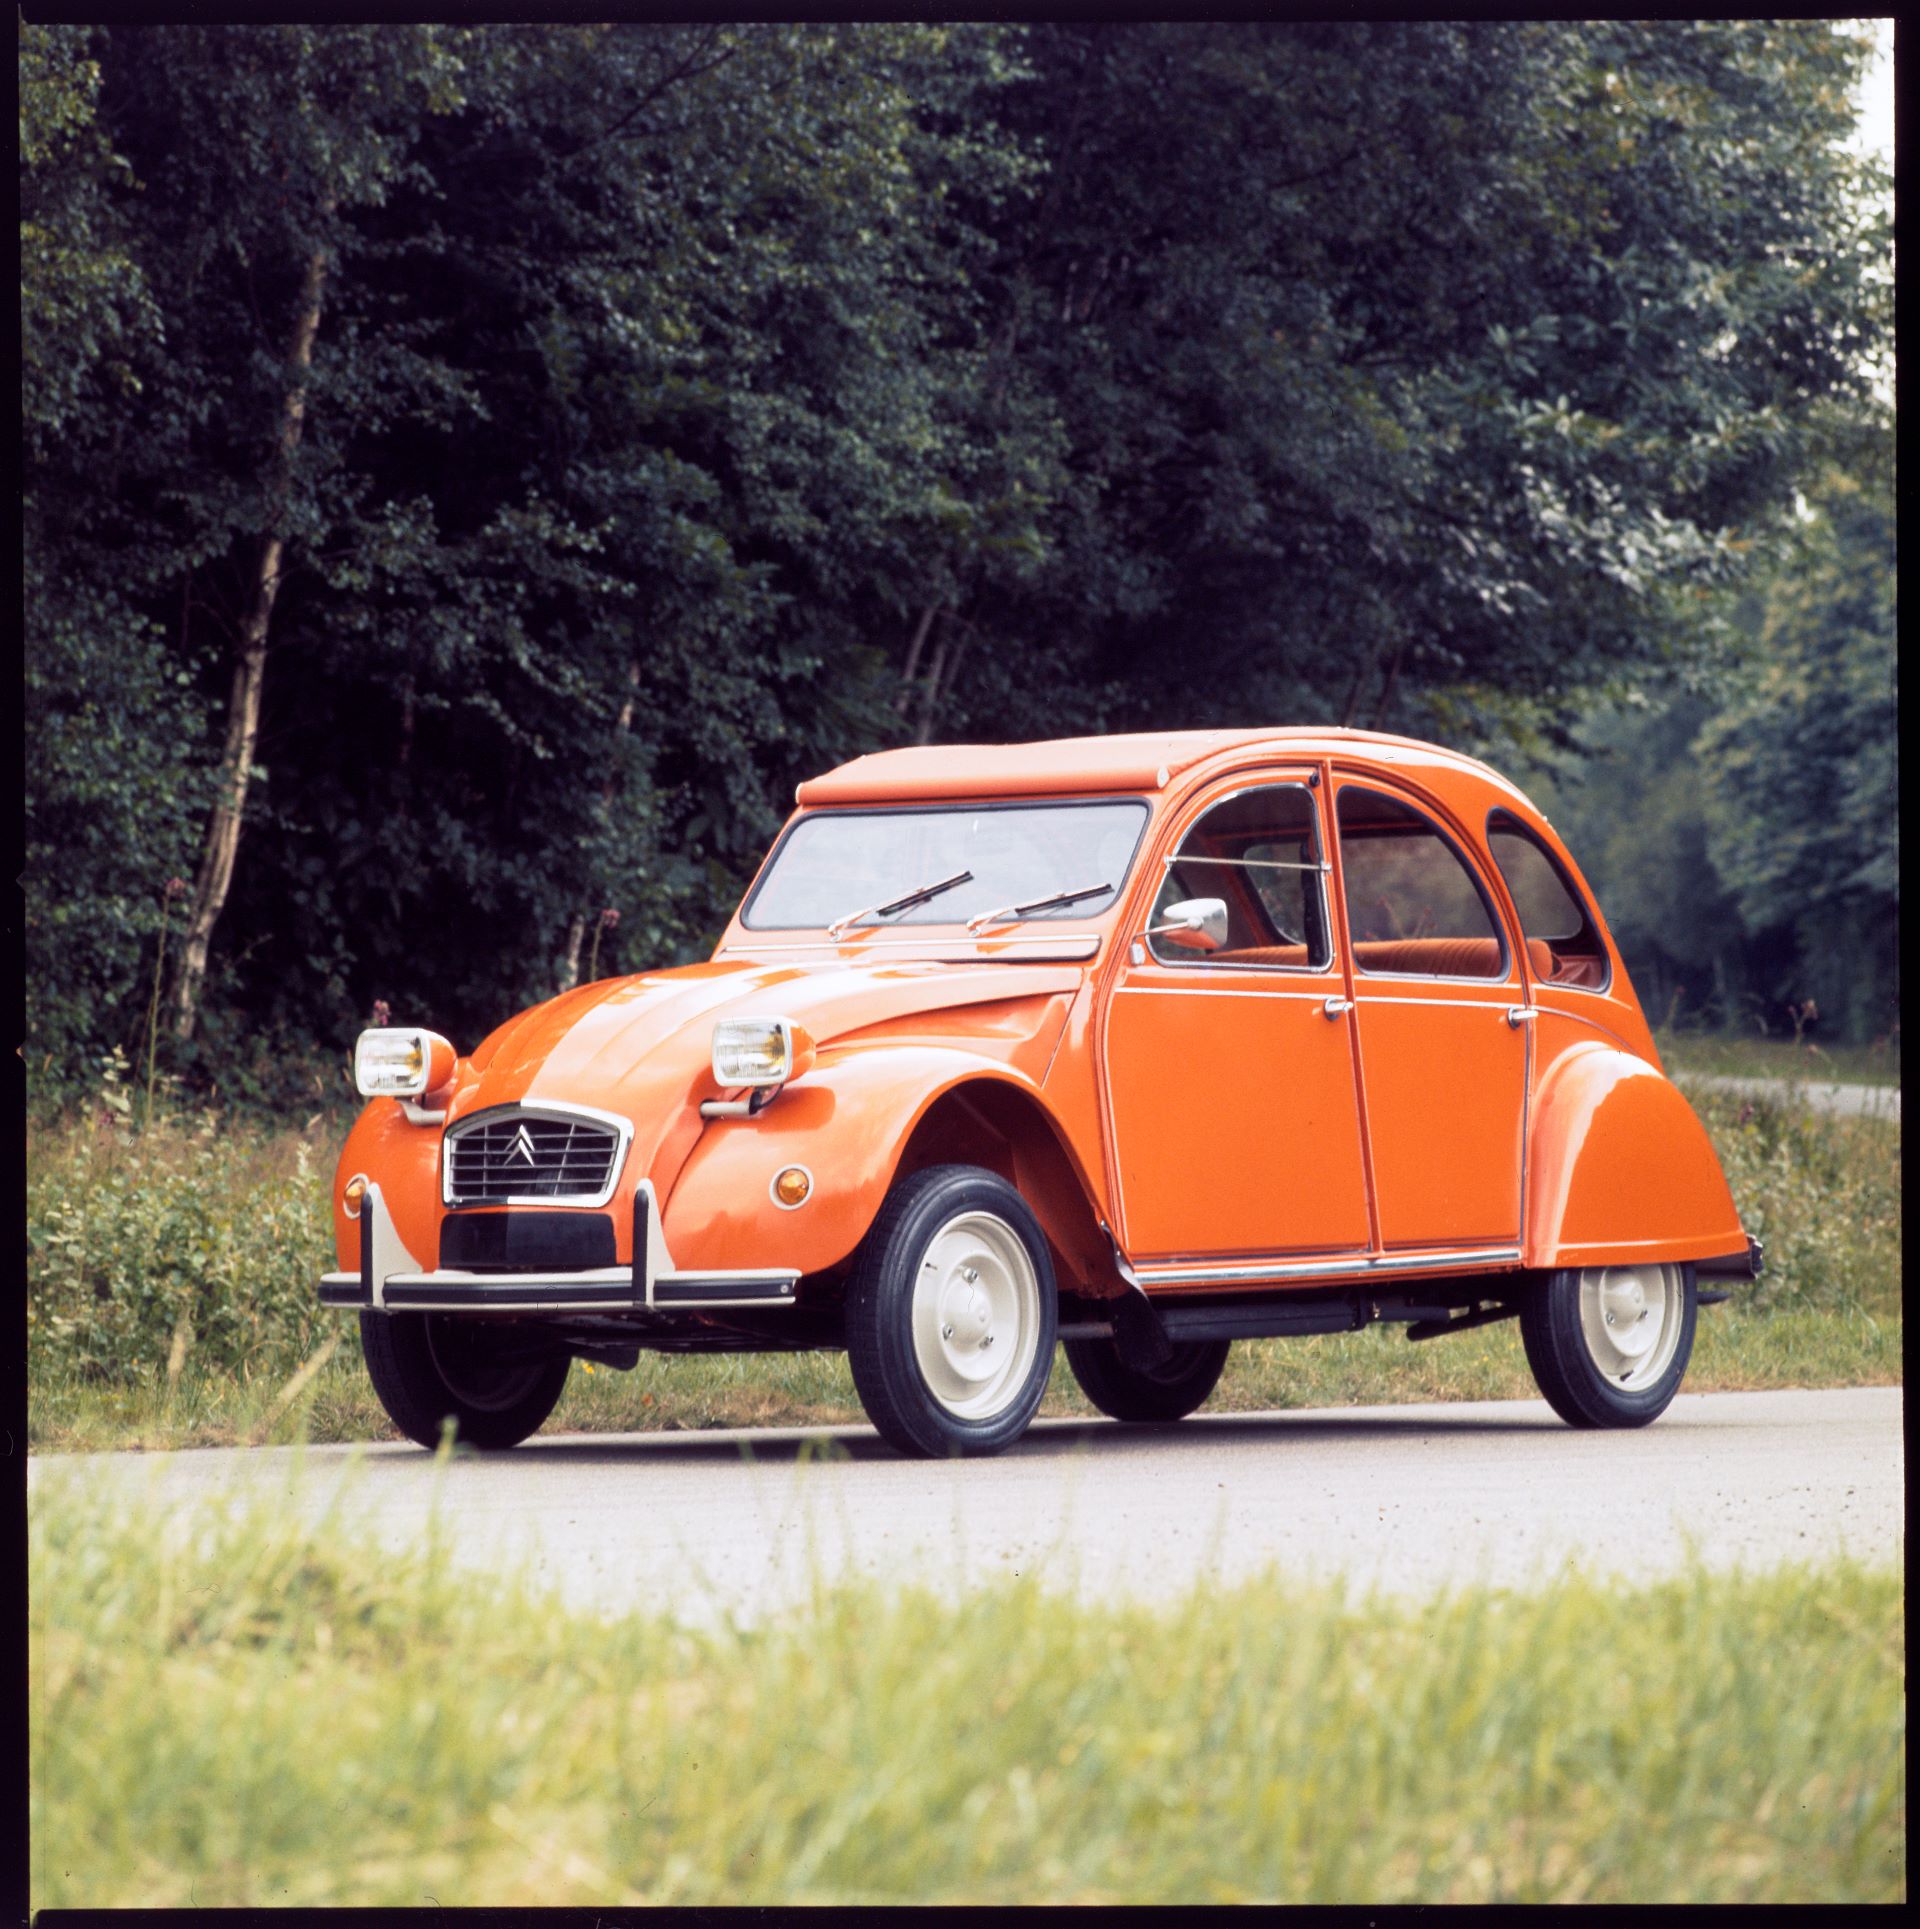 THE 2 CV CELEBRATES ITS 75TH BIRTHDAY – HISTORIC, ICONIC AND POPULAR